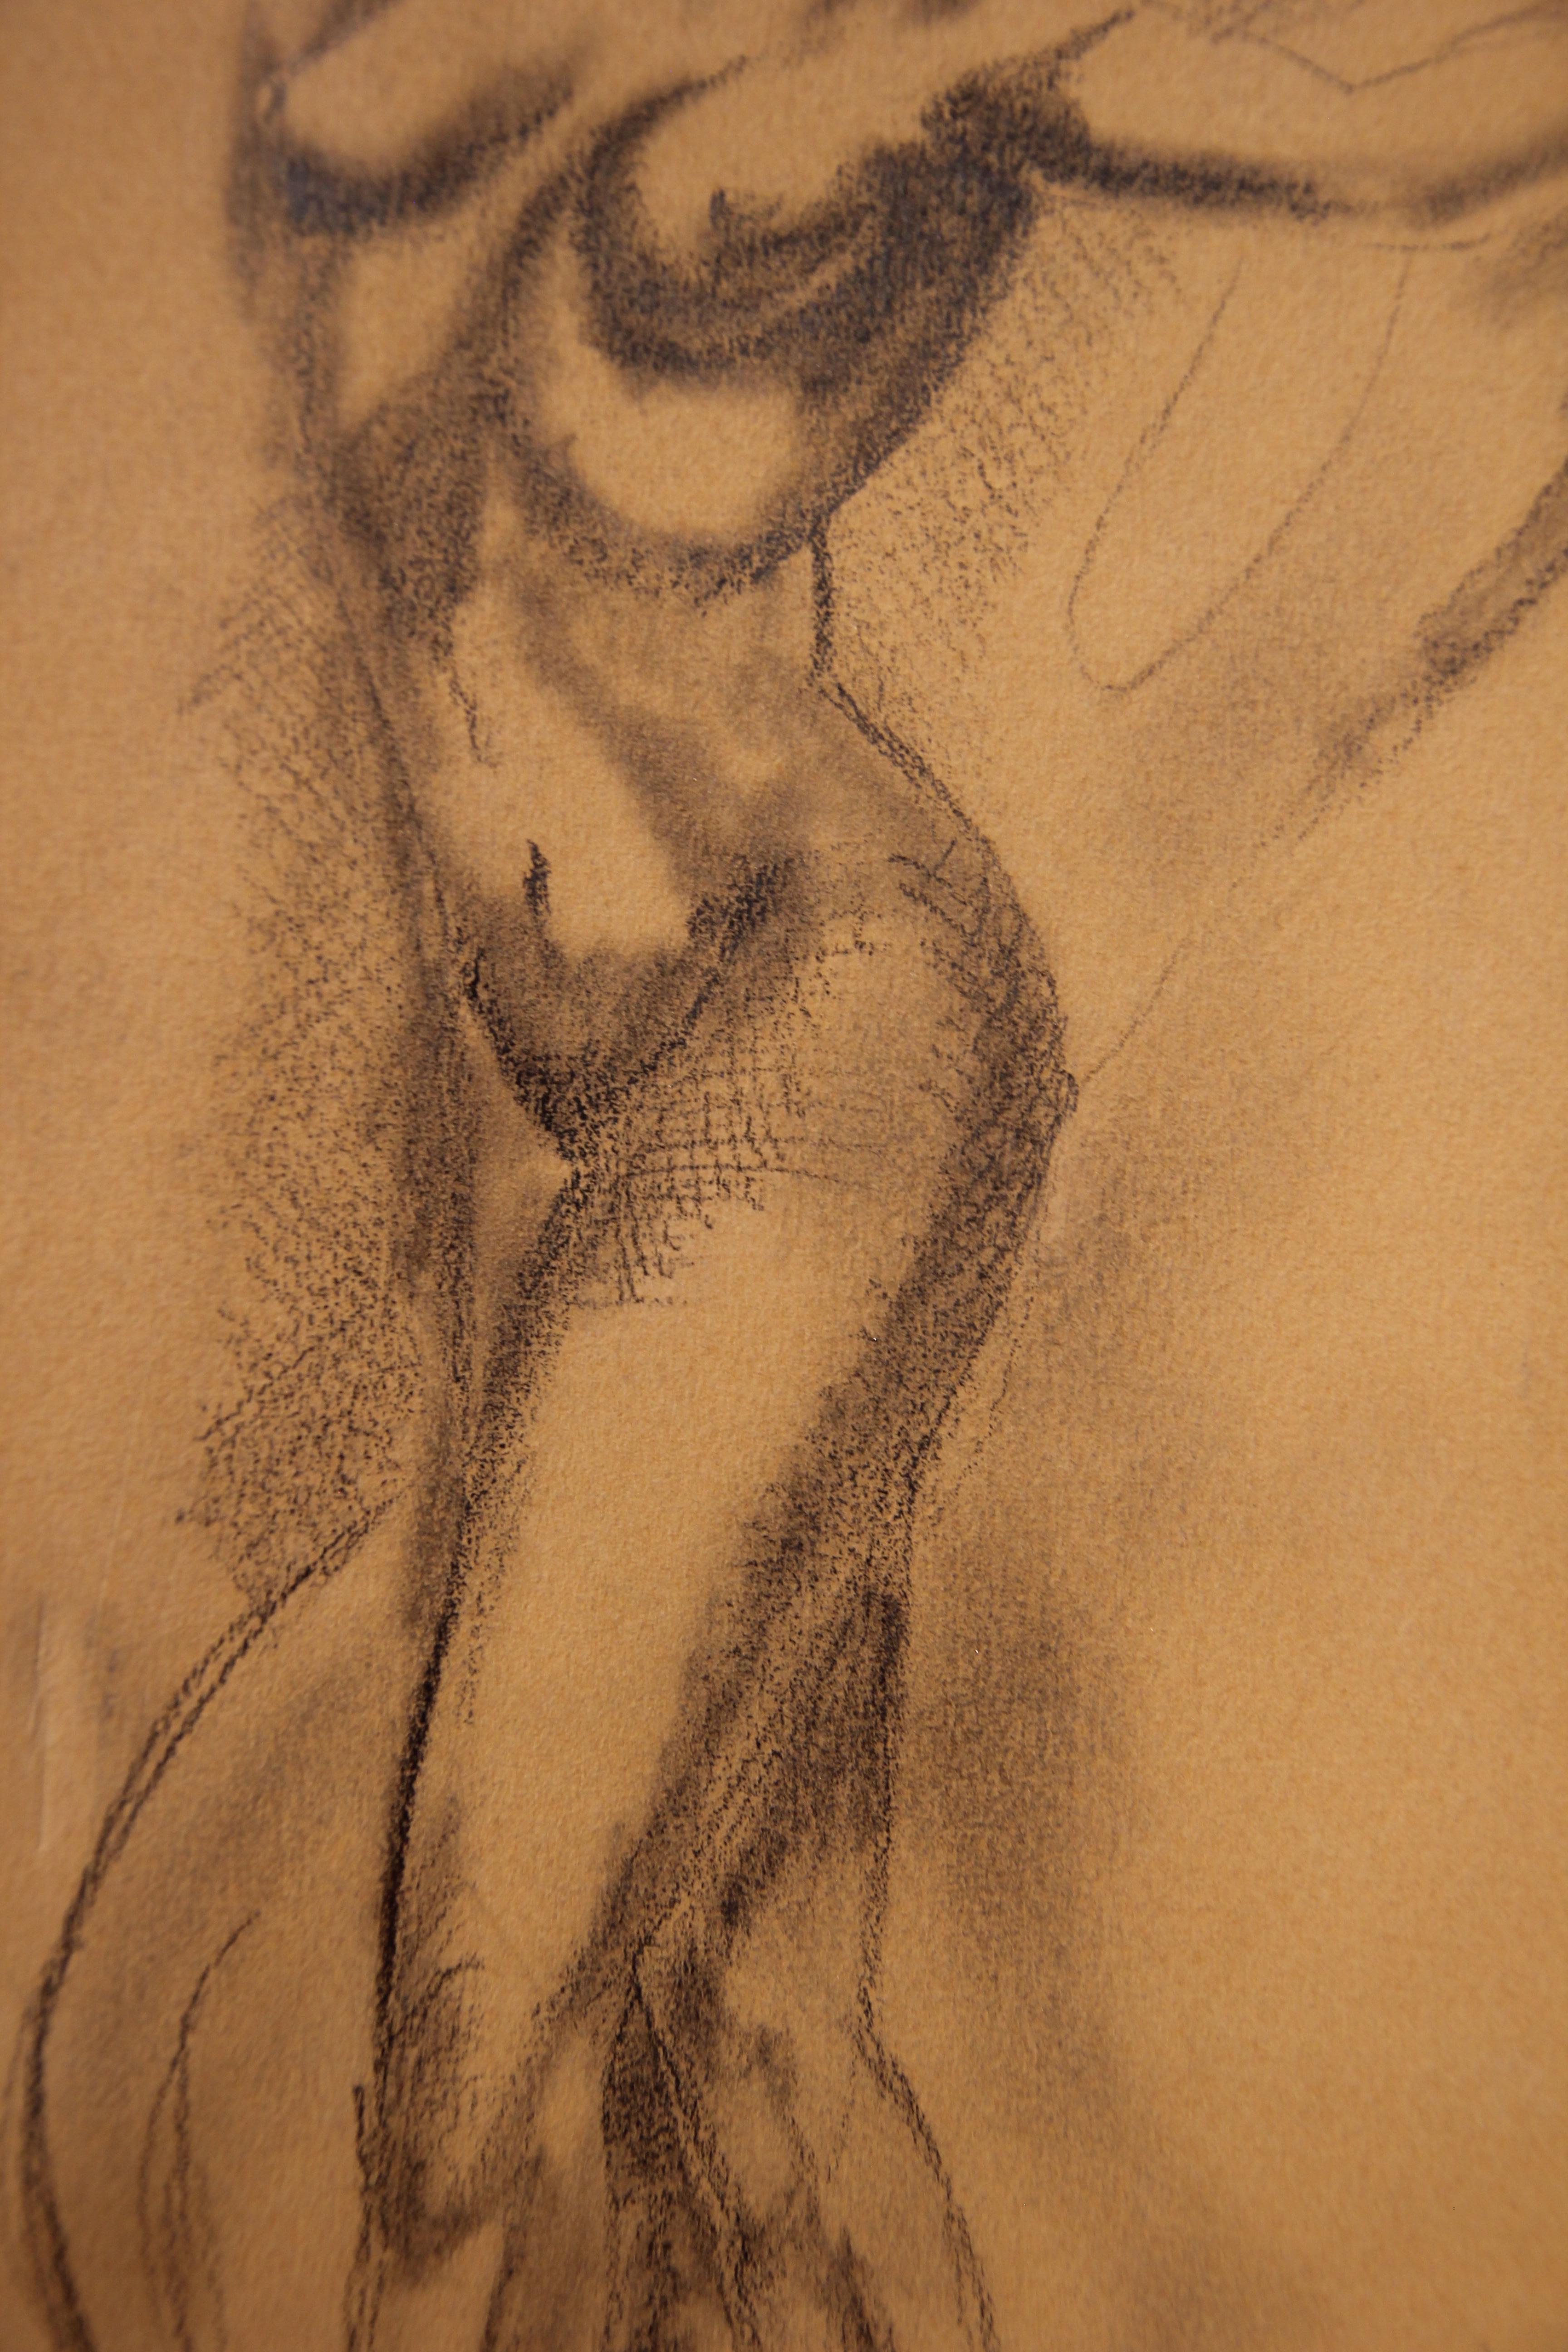 Dancing Figurative Study of a Nude Woman - Art by Thierry Andre